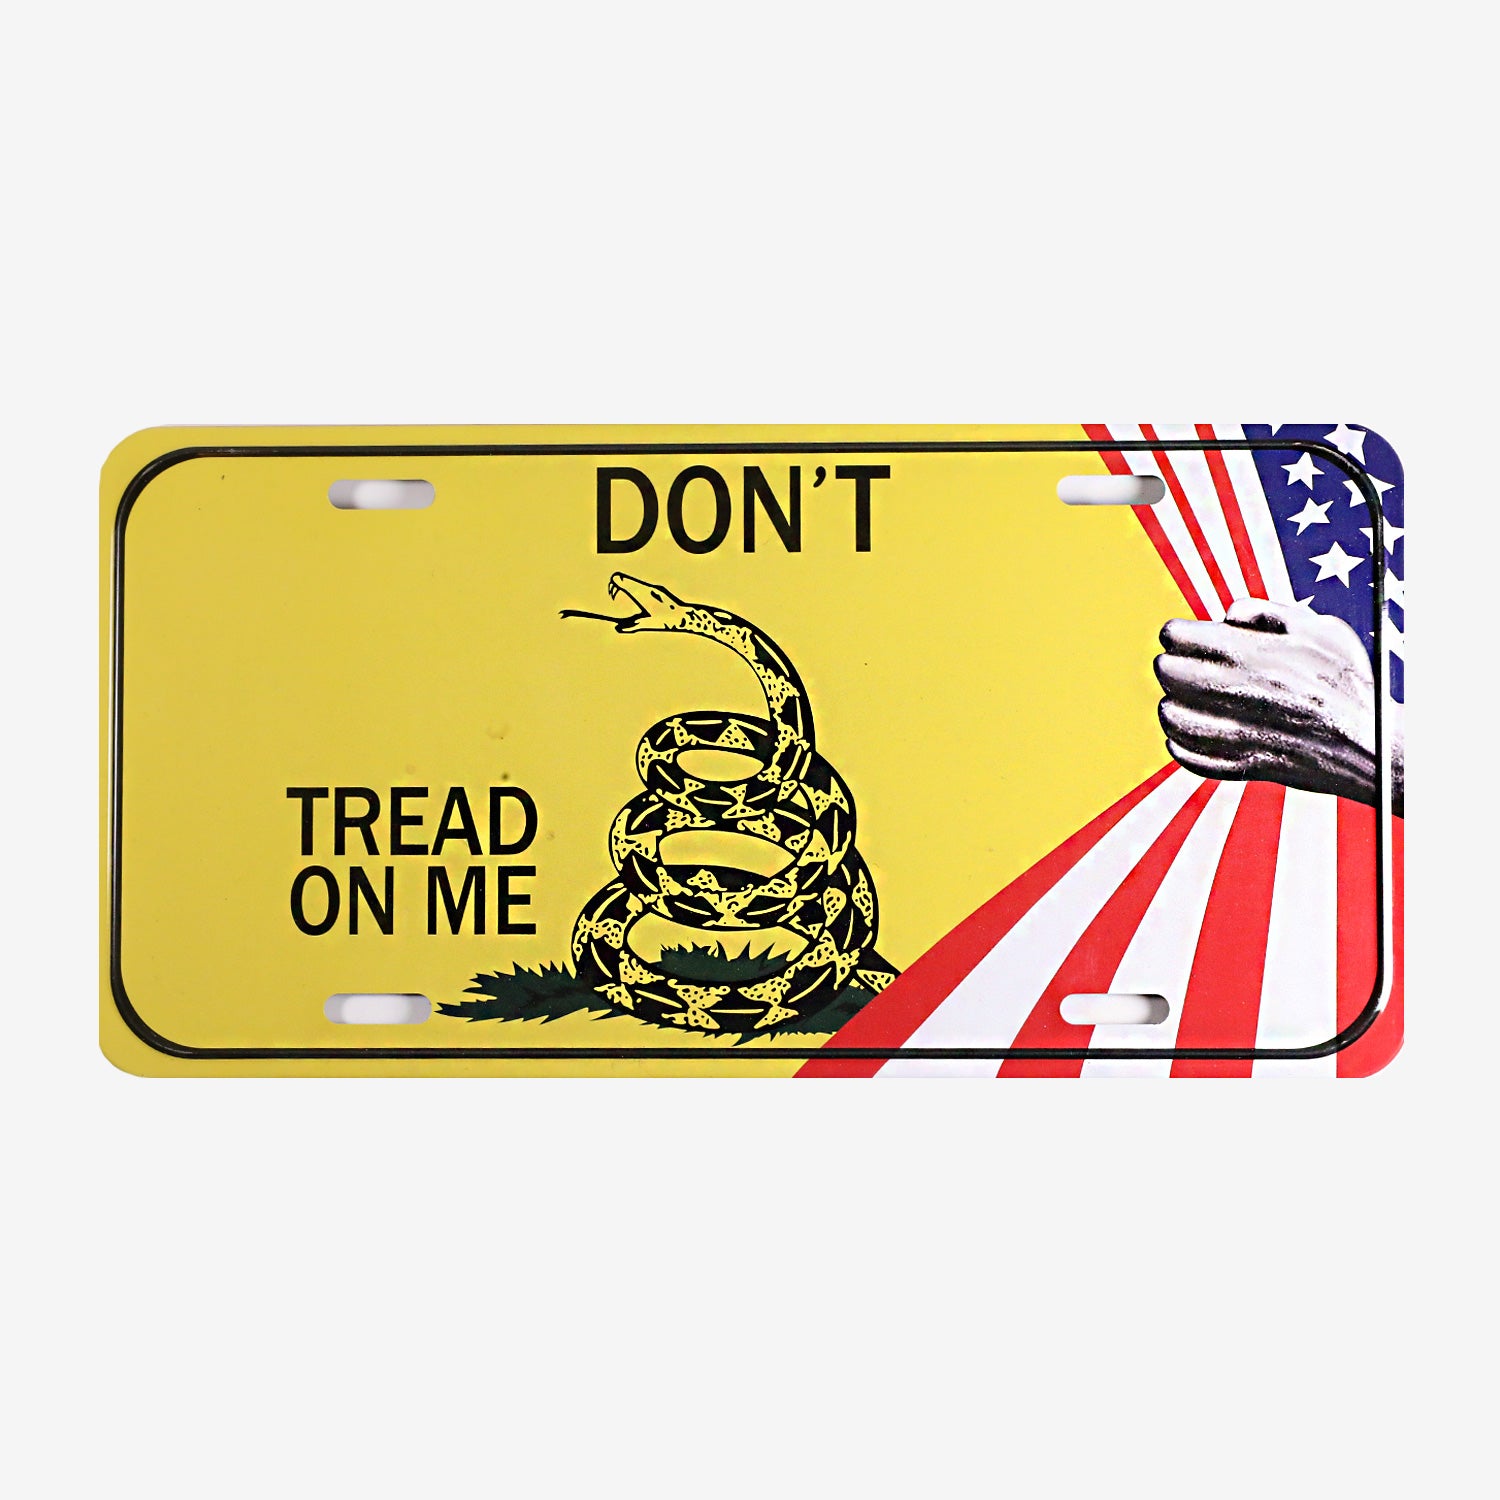 Don't Tread On Me License Plate Cover